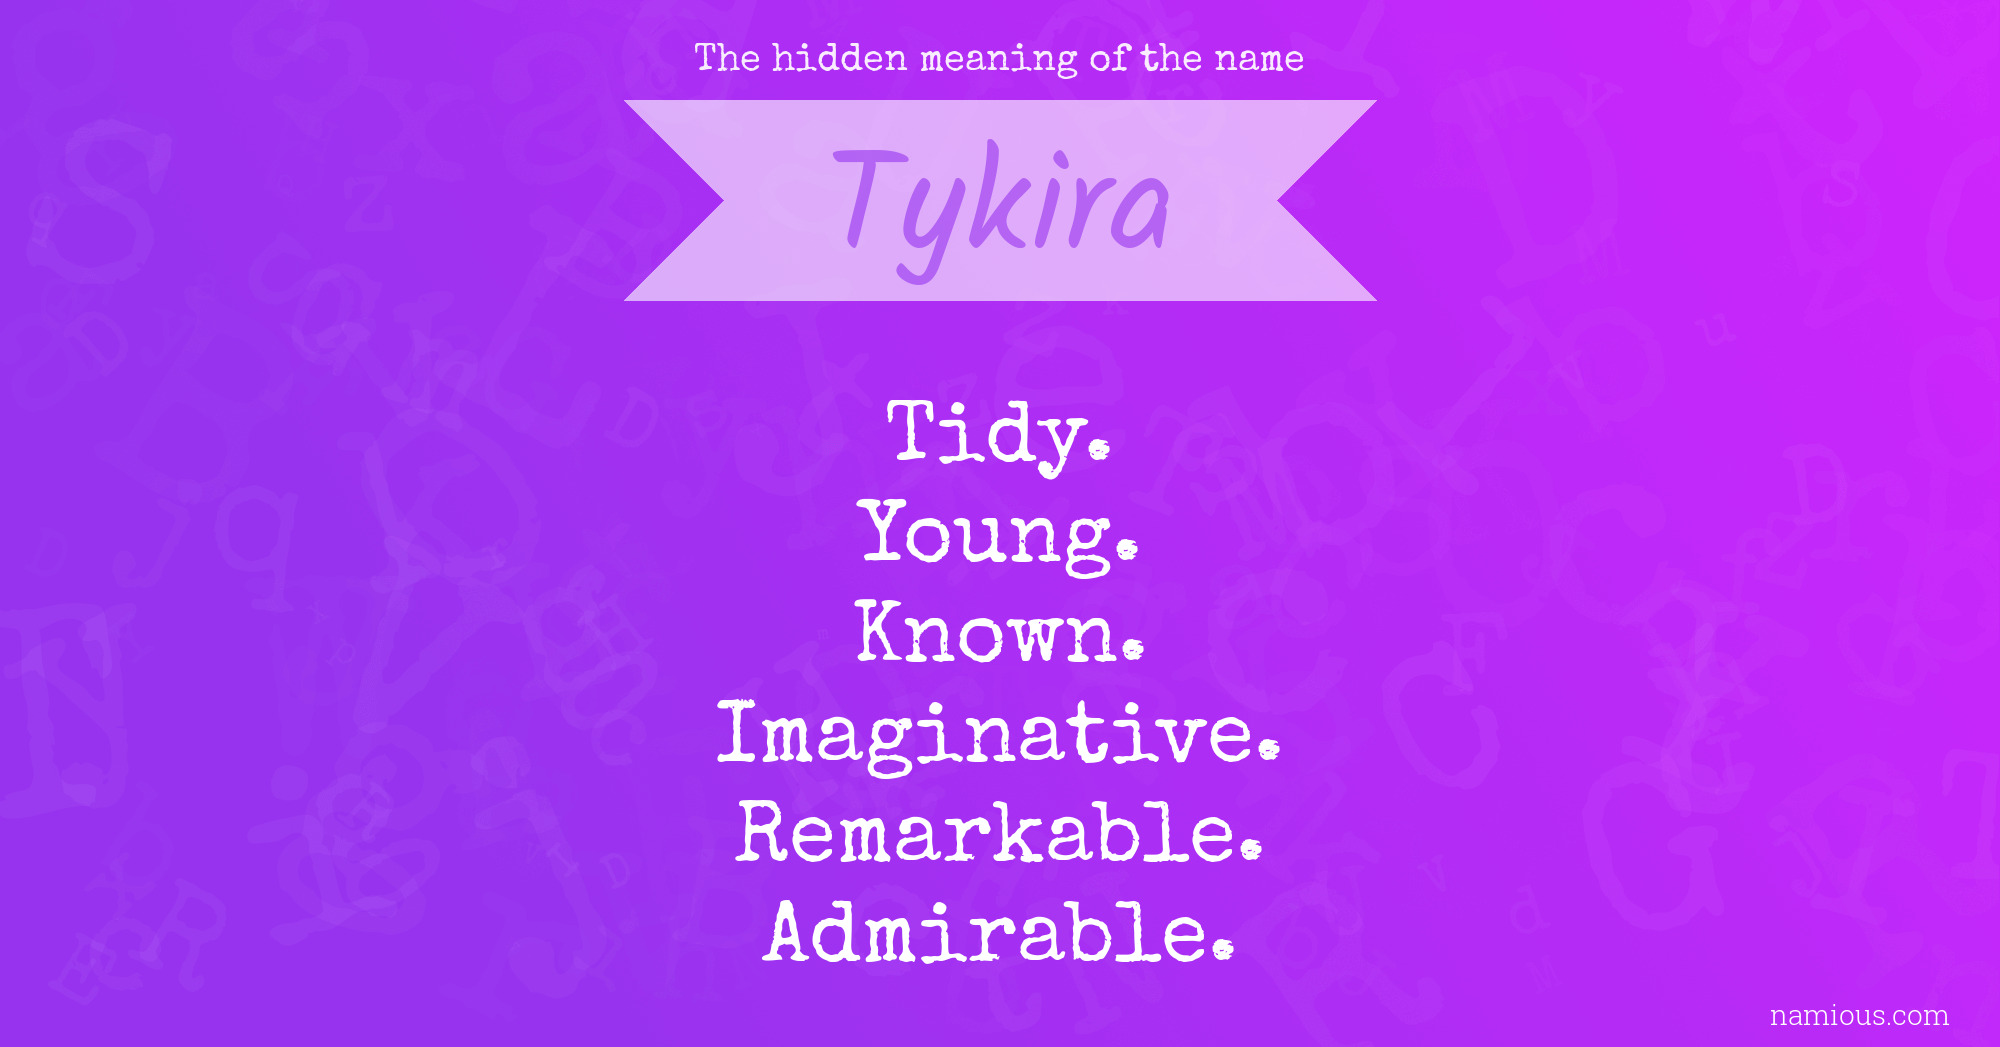 The hidden meaning of the name Tykira